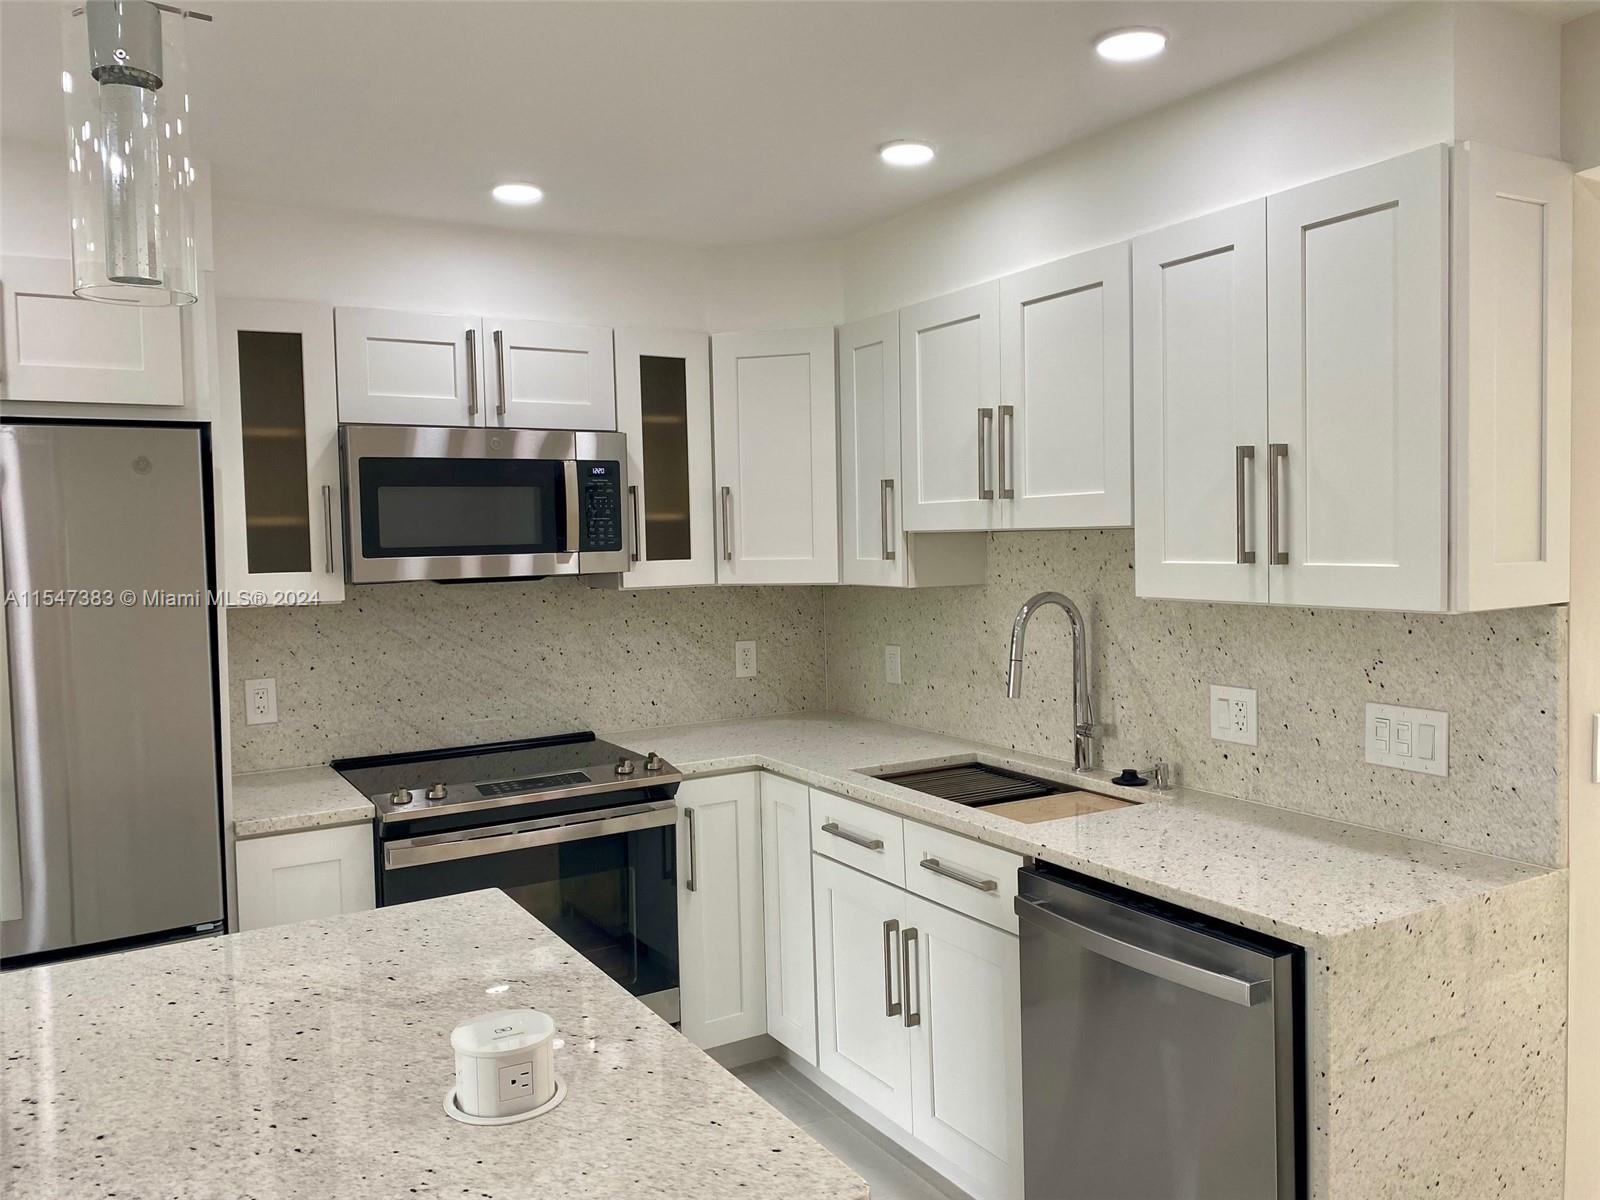 a kitchen with stainless steel appliances kitchen island a white cabinets sink and stove